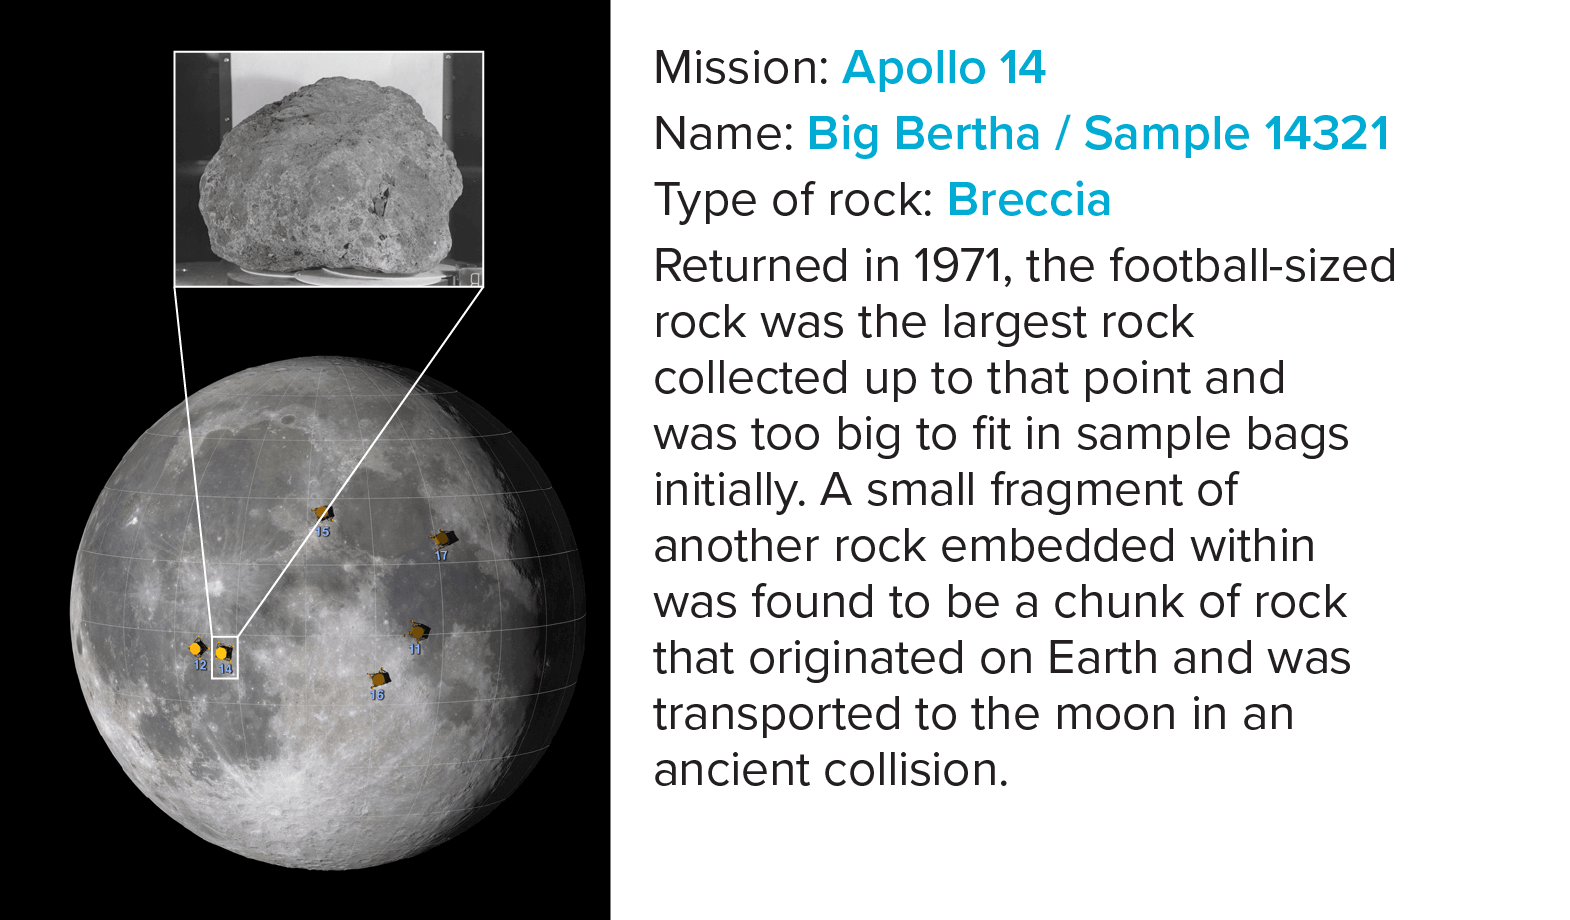 Returned in 1971, the football-sized rock was the largest rock collected up to that point and was too big to fit in sample bags initially. A small fragment of another rock embedded within was found to be a chunk of rock that originated on Earth and was transported to the moon in an ancient collision. 